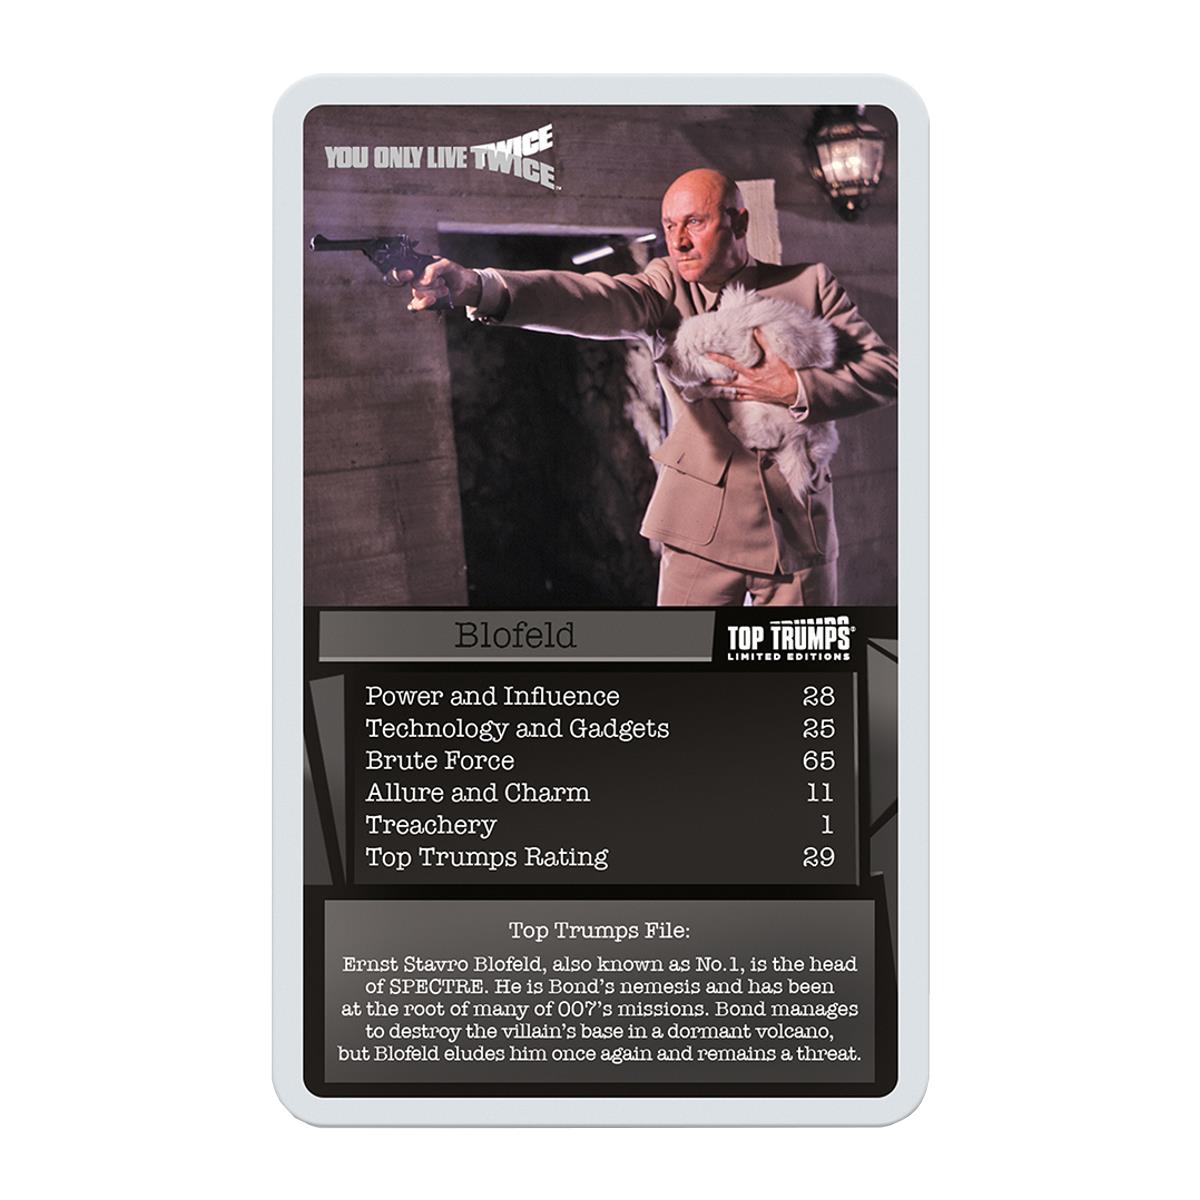 James Bond 007 'Every Assignment' 2020 Top Trumps Card Game